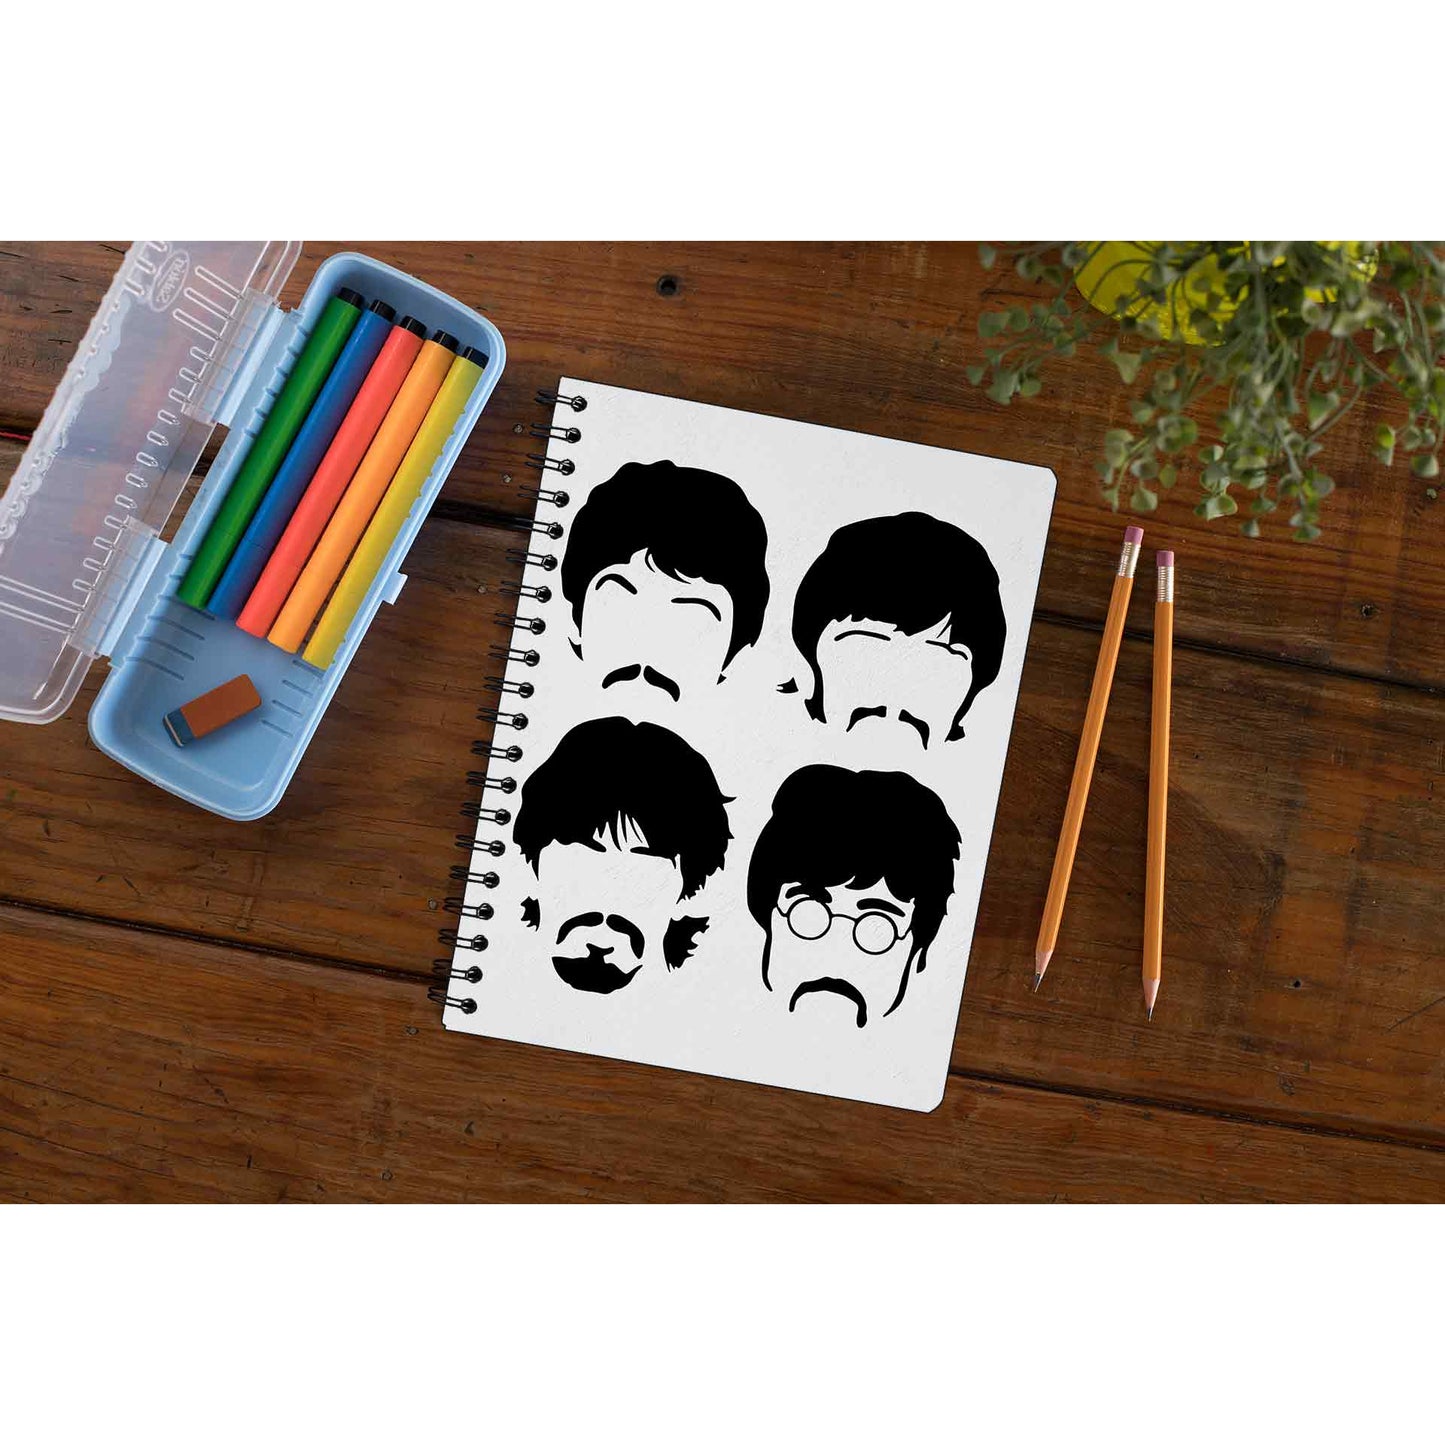 The Beatles Notebook Notebook The Banyan Tee TBT Notepad paper online diary personal girls cute office under 100